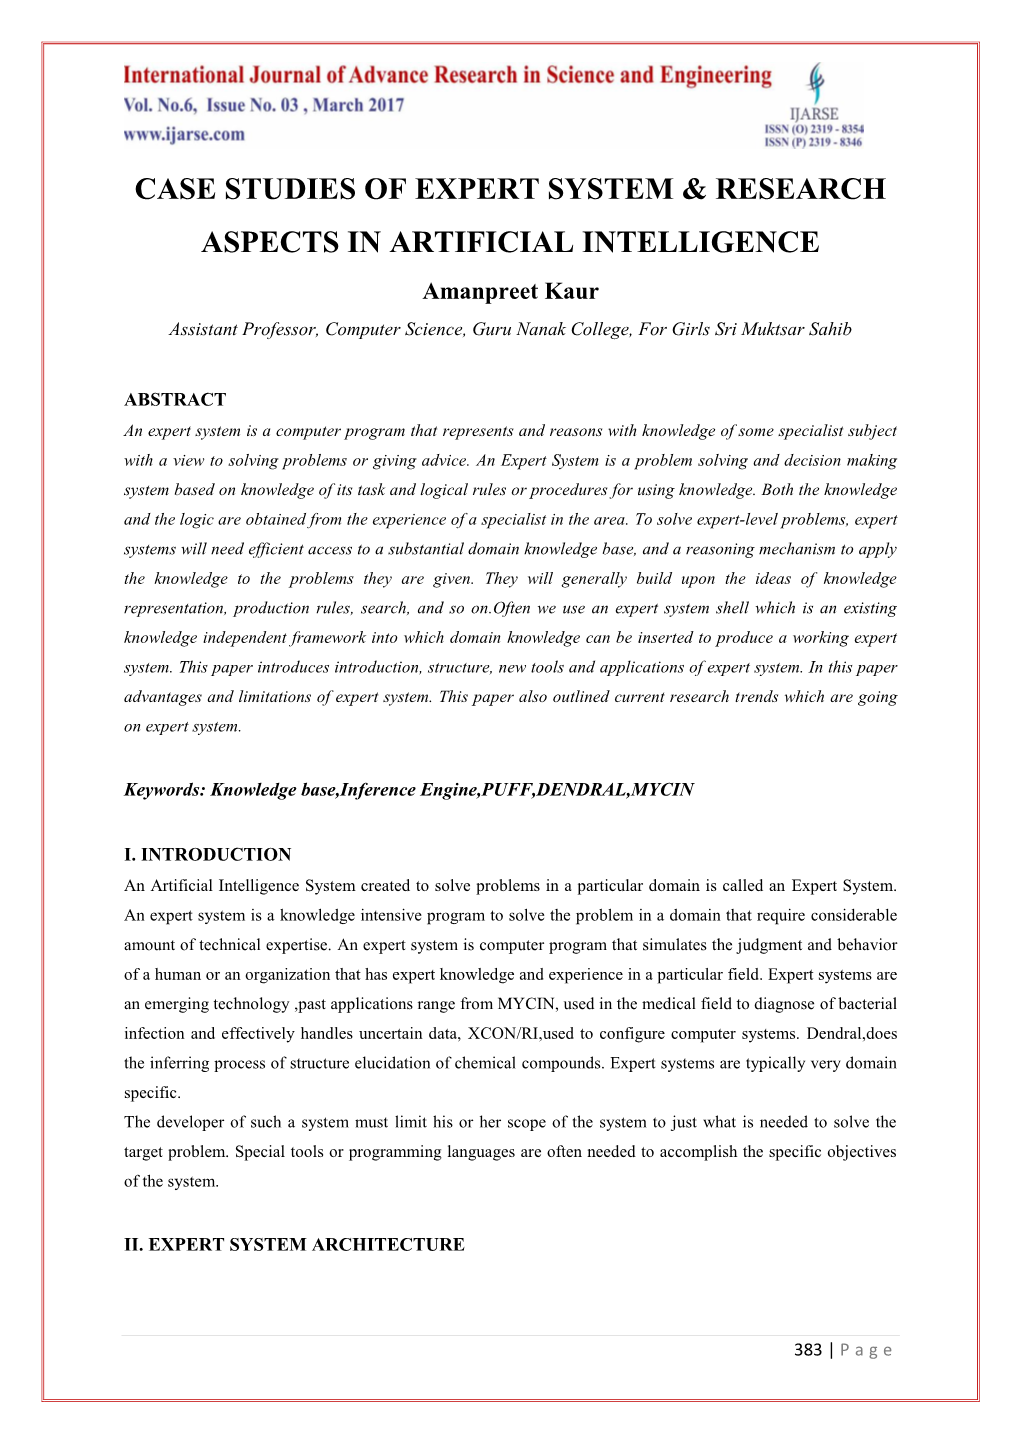 Case Studies of Expert System & Research Aspects in Artificial Intelligence